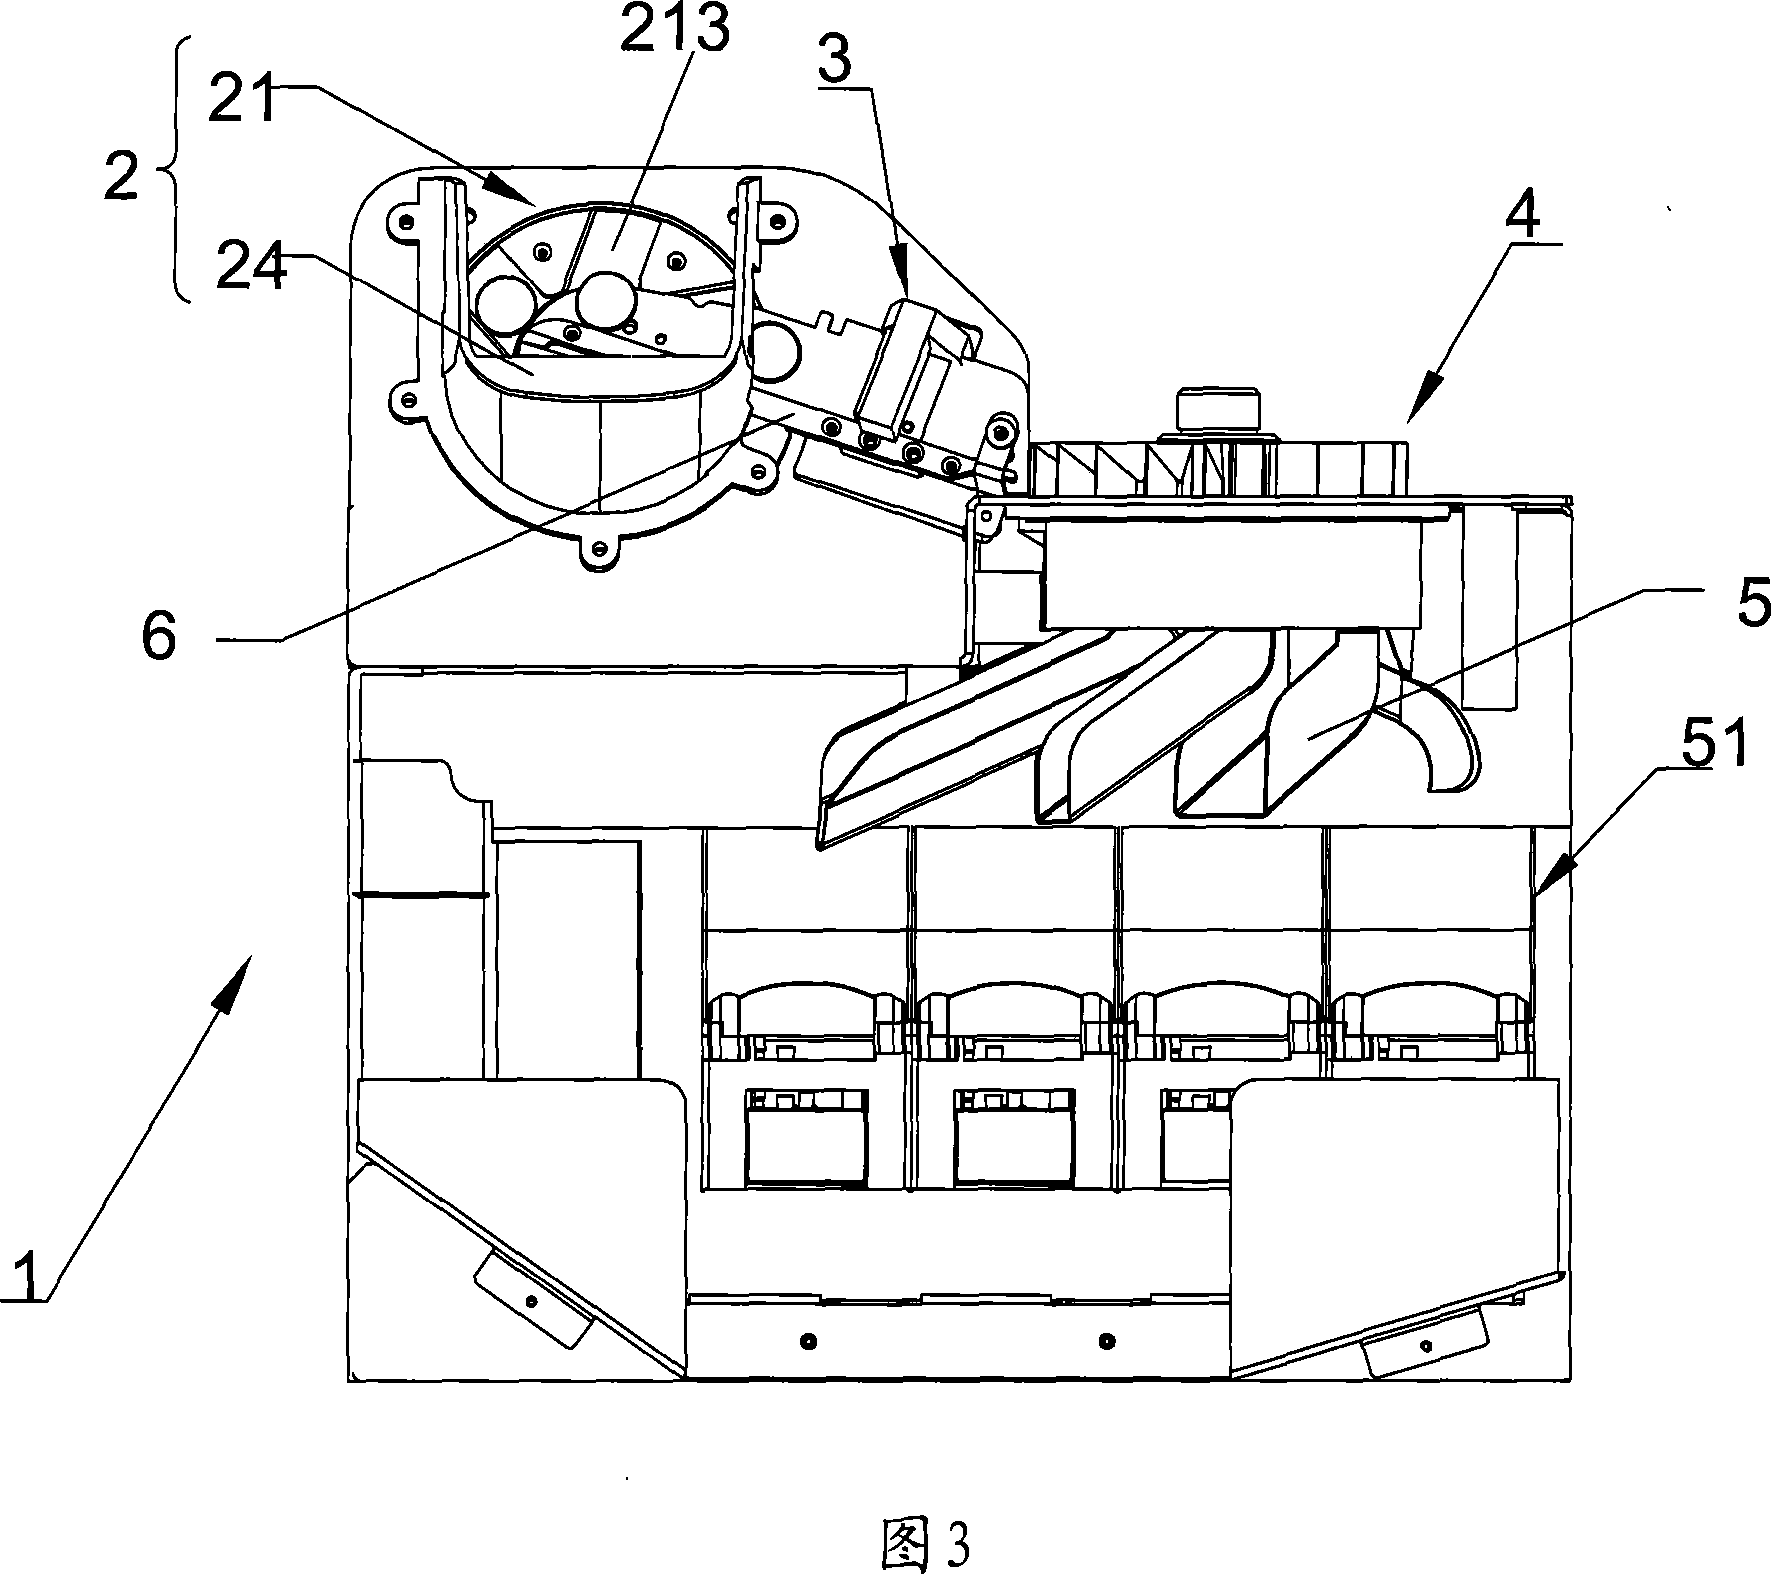 Coin sorting device